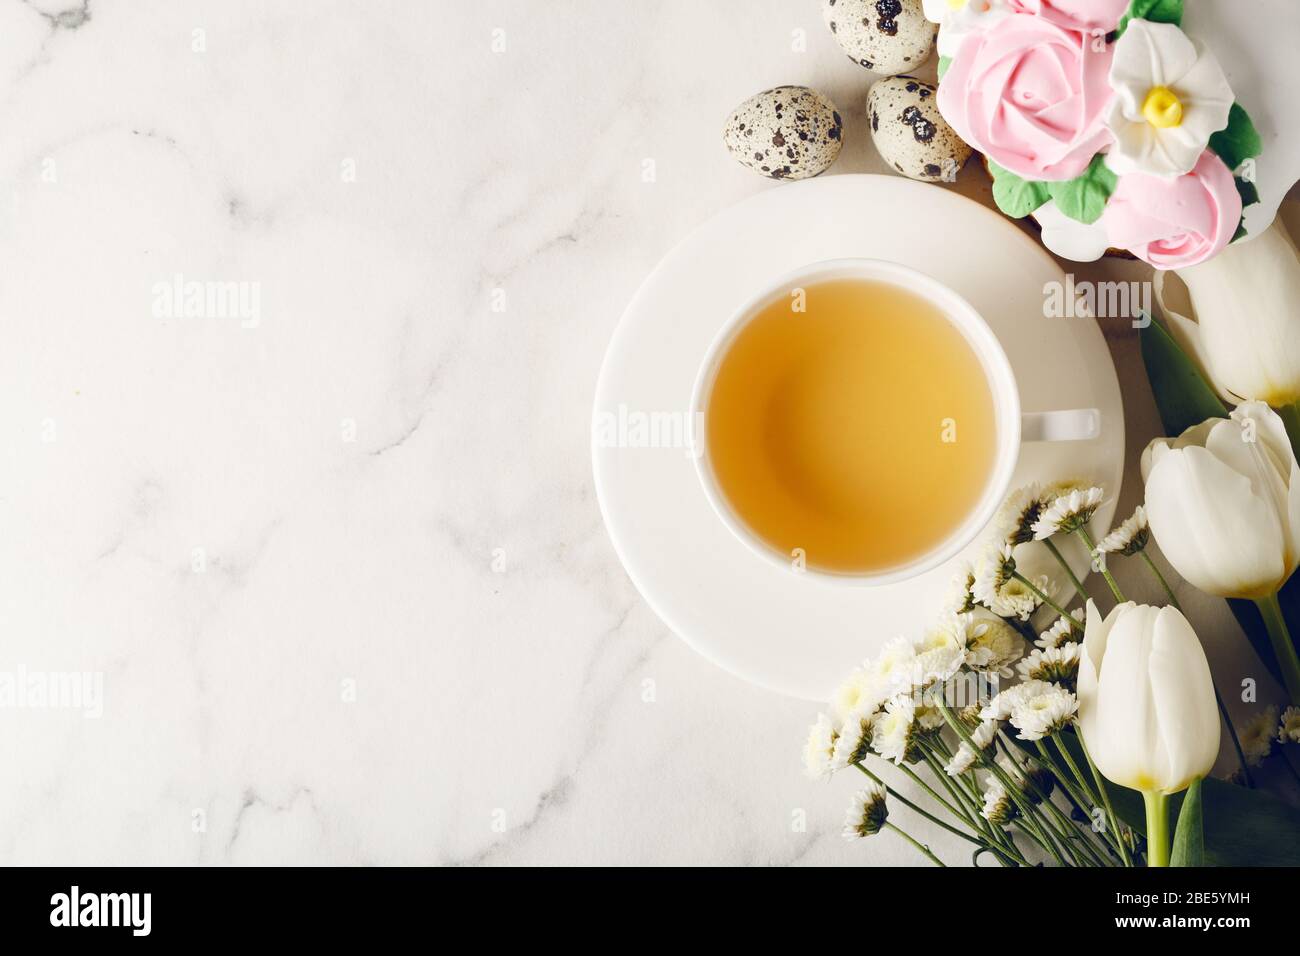 Easter breakfast. Homemade cake with cream roses on marble table. Cup of tea with flowers. Holiday concept. Top view, copy space Stock Photo